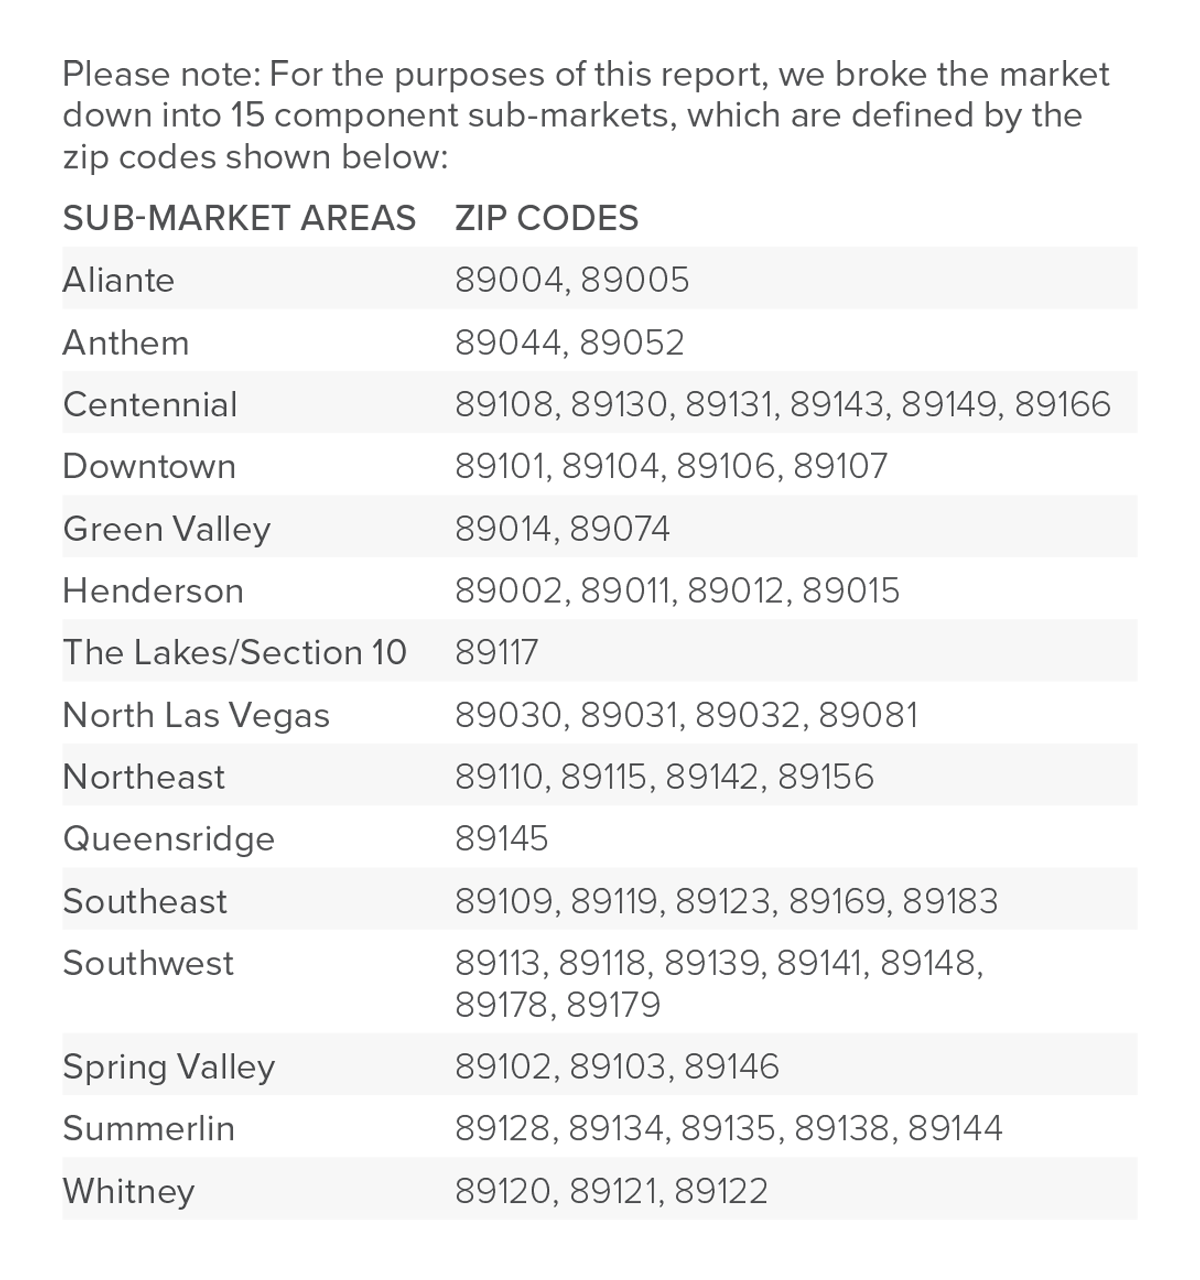 A chart showing 15 sub-market areas and their corresponding zip codes in the Greater Las Vegas, Nevada area.